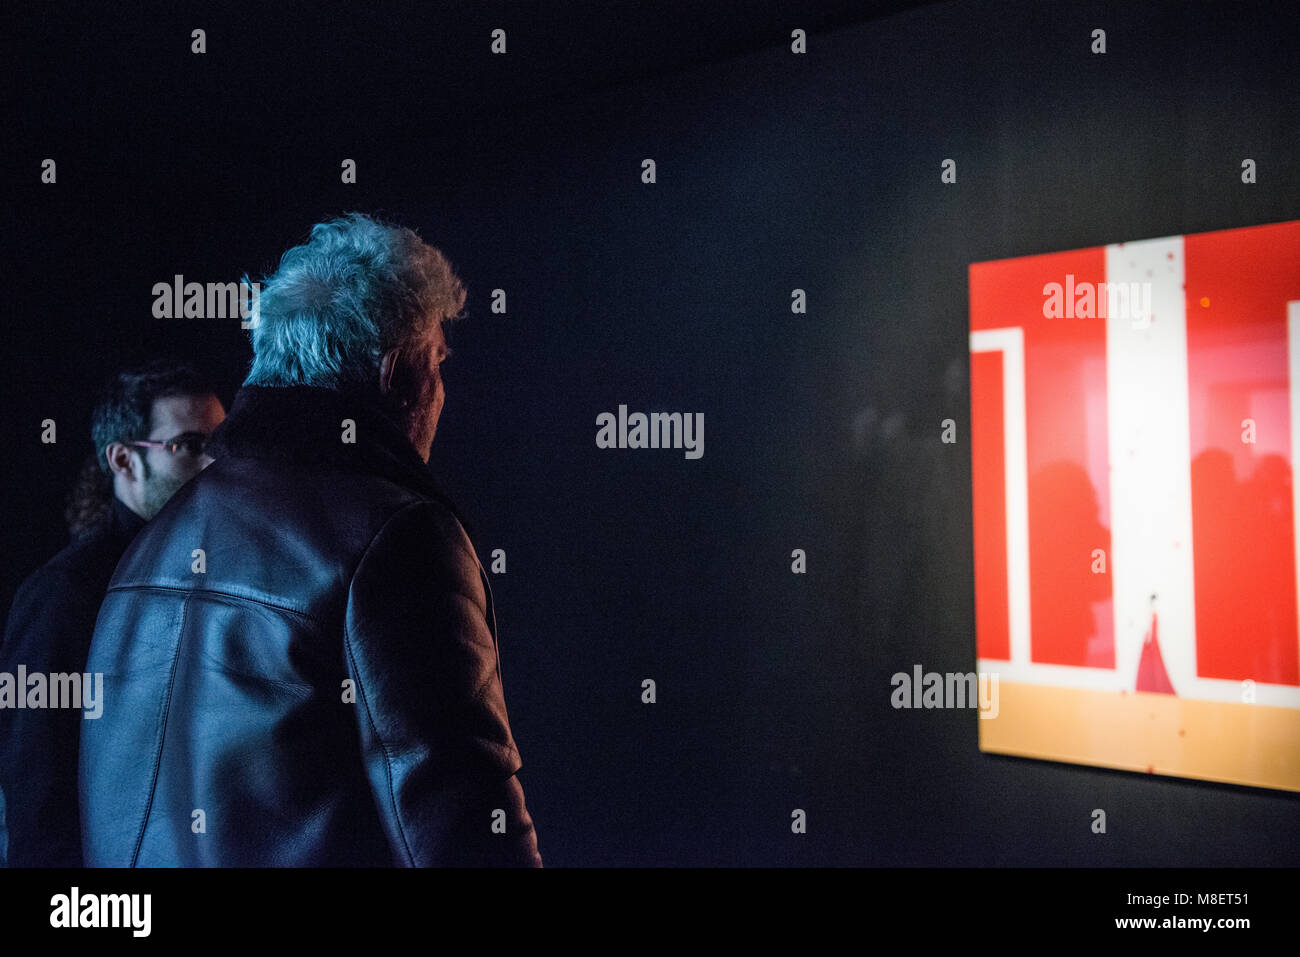 Cáceres, Spain. 17th Mar, 2018. Spanish filmmaker and international director, visits 'Tú y yo no somos como todo el mundo', an exhibition of artworks inspired on his films.  Almodovar will receive this afternoon the Honorary Award at the San Pancracio film festival in Cáceres.  Esteban Martinena/Alamy Live News. Stock Photo